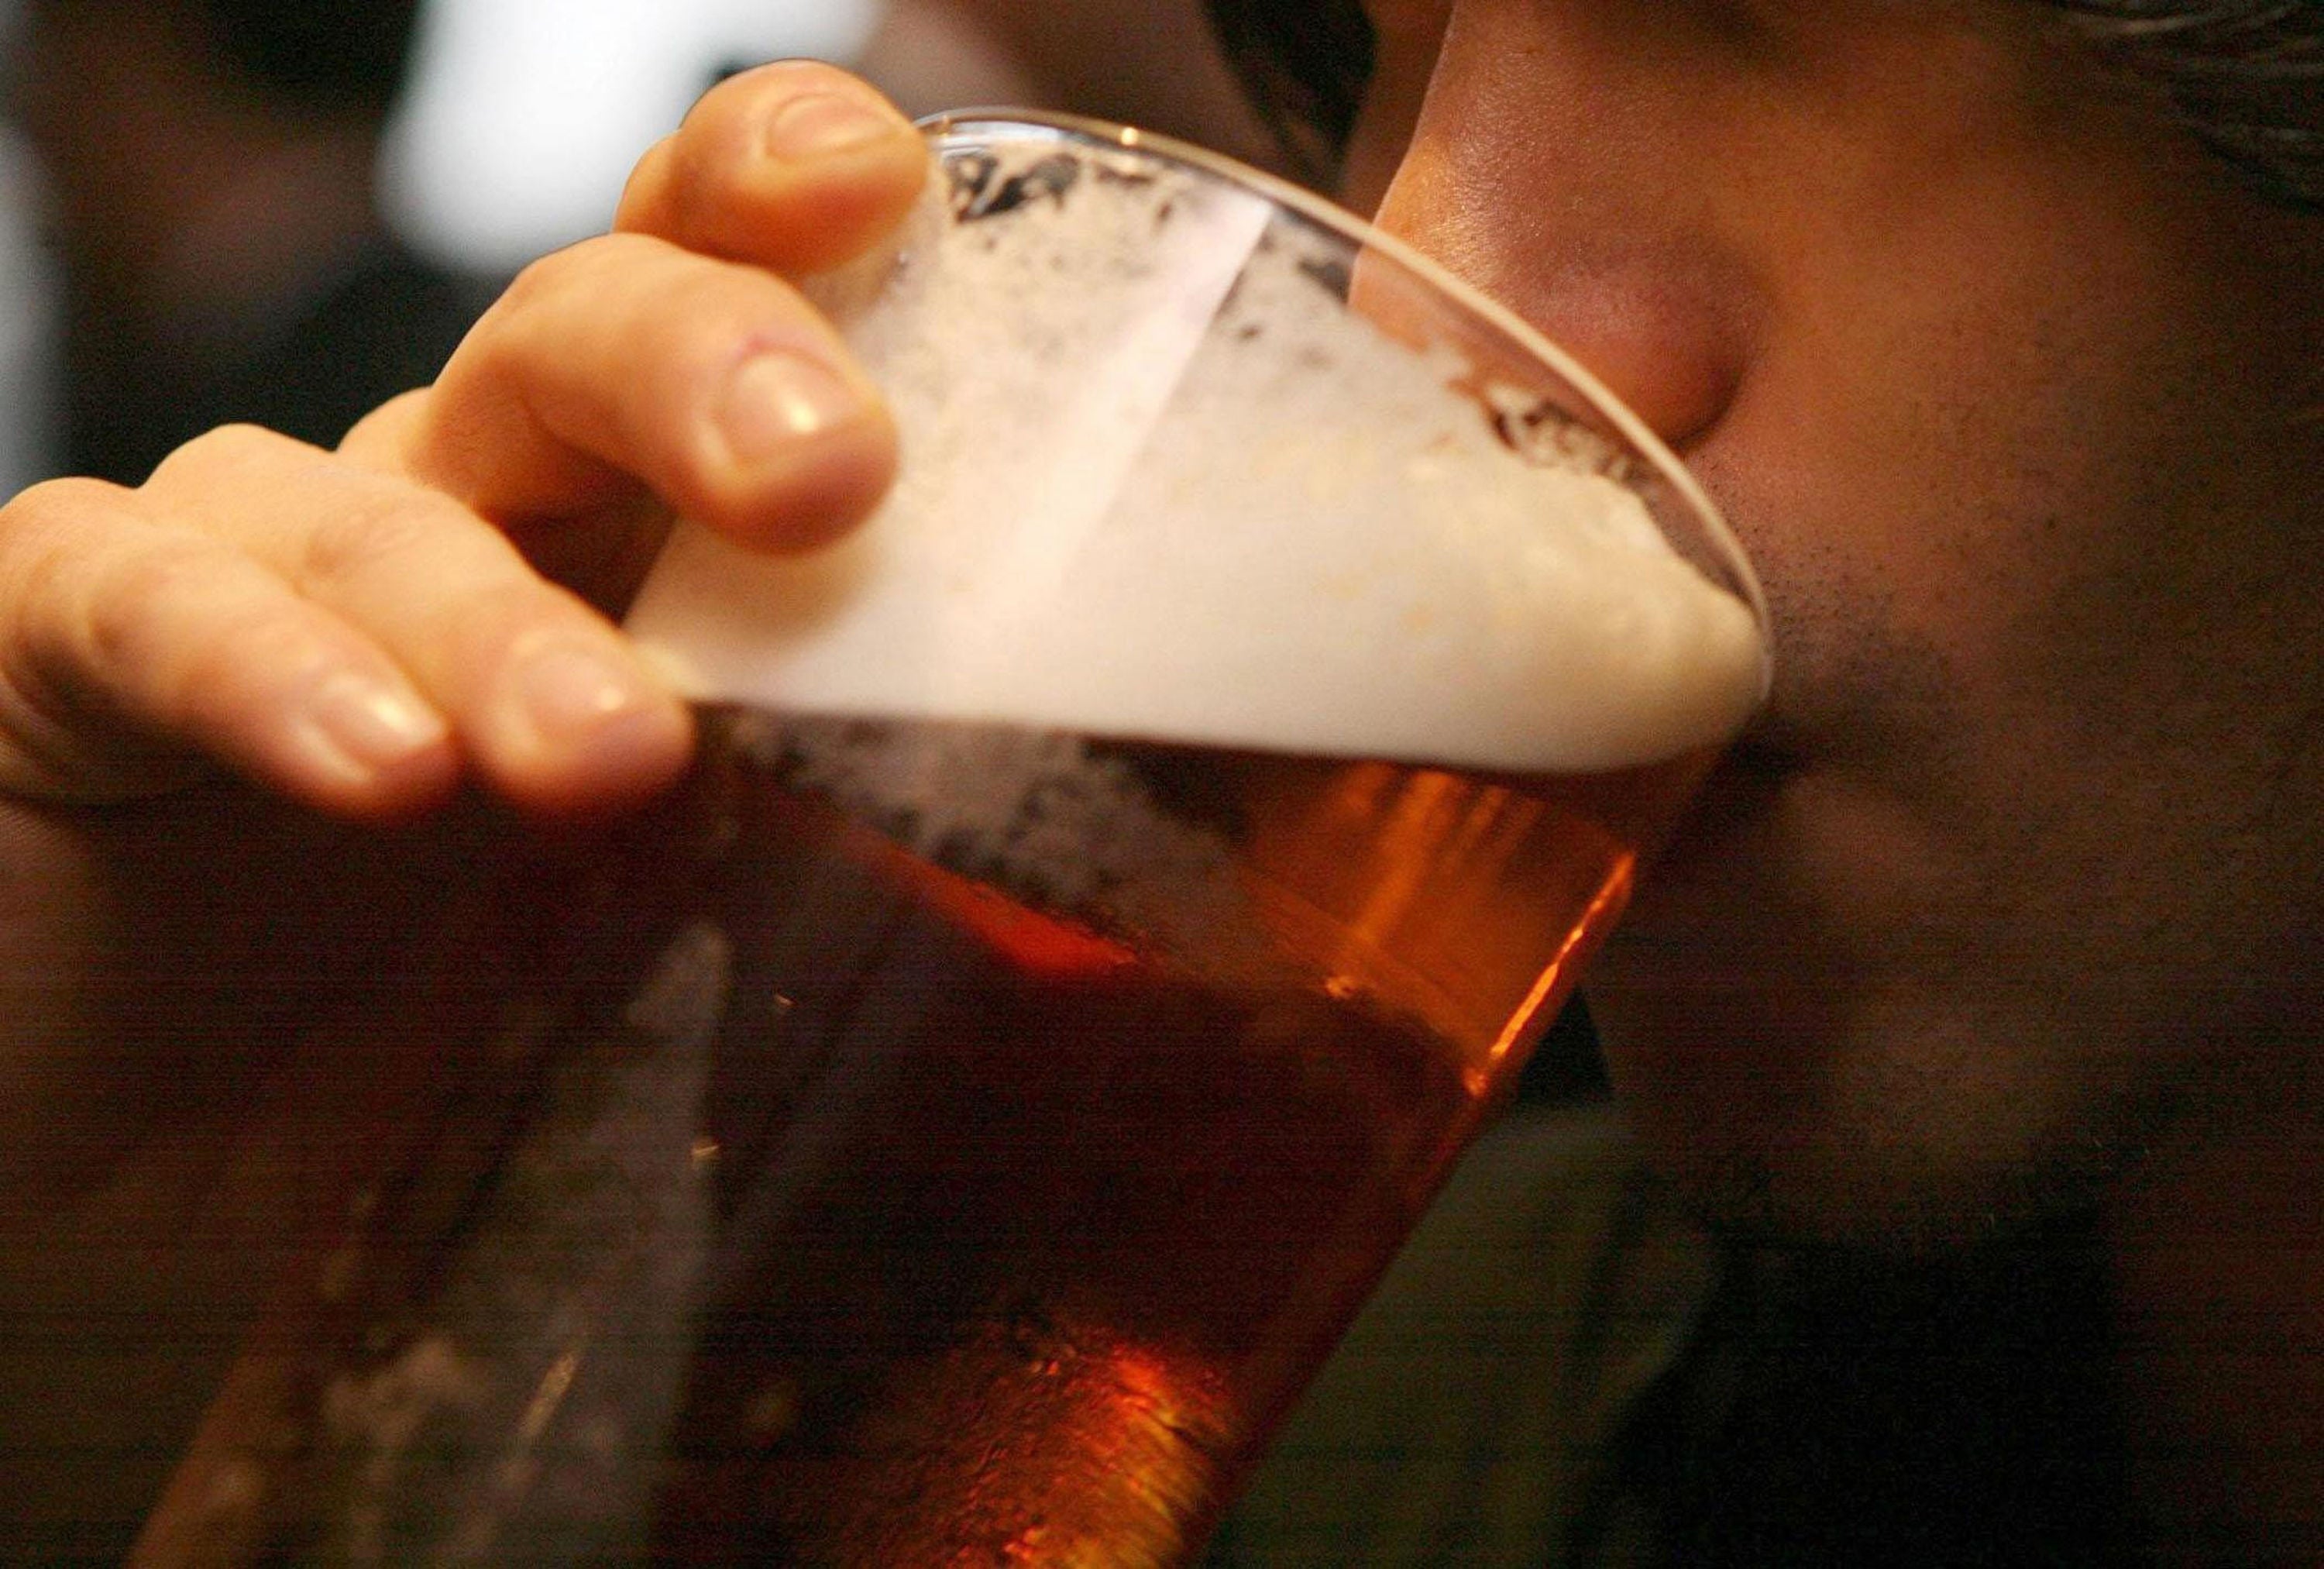 Business rates hike is ‘last thing pubs need’